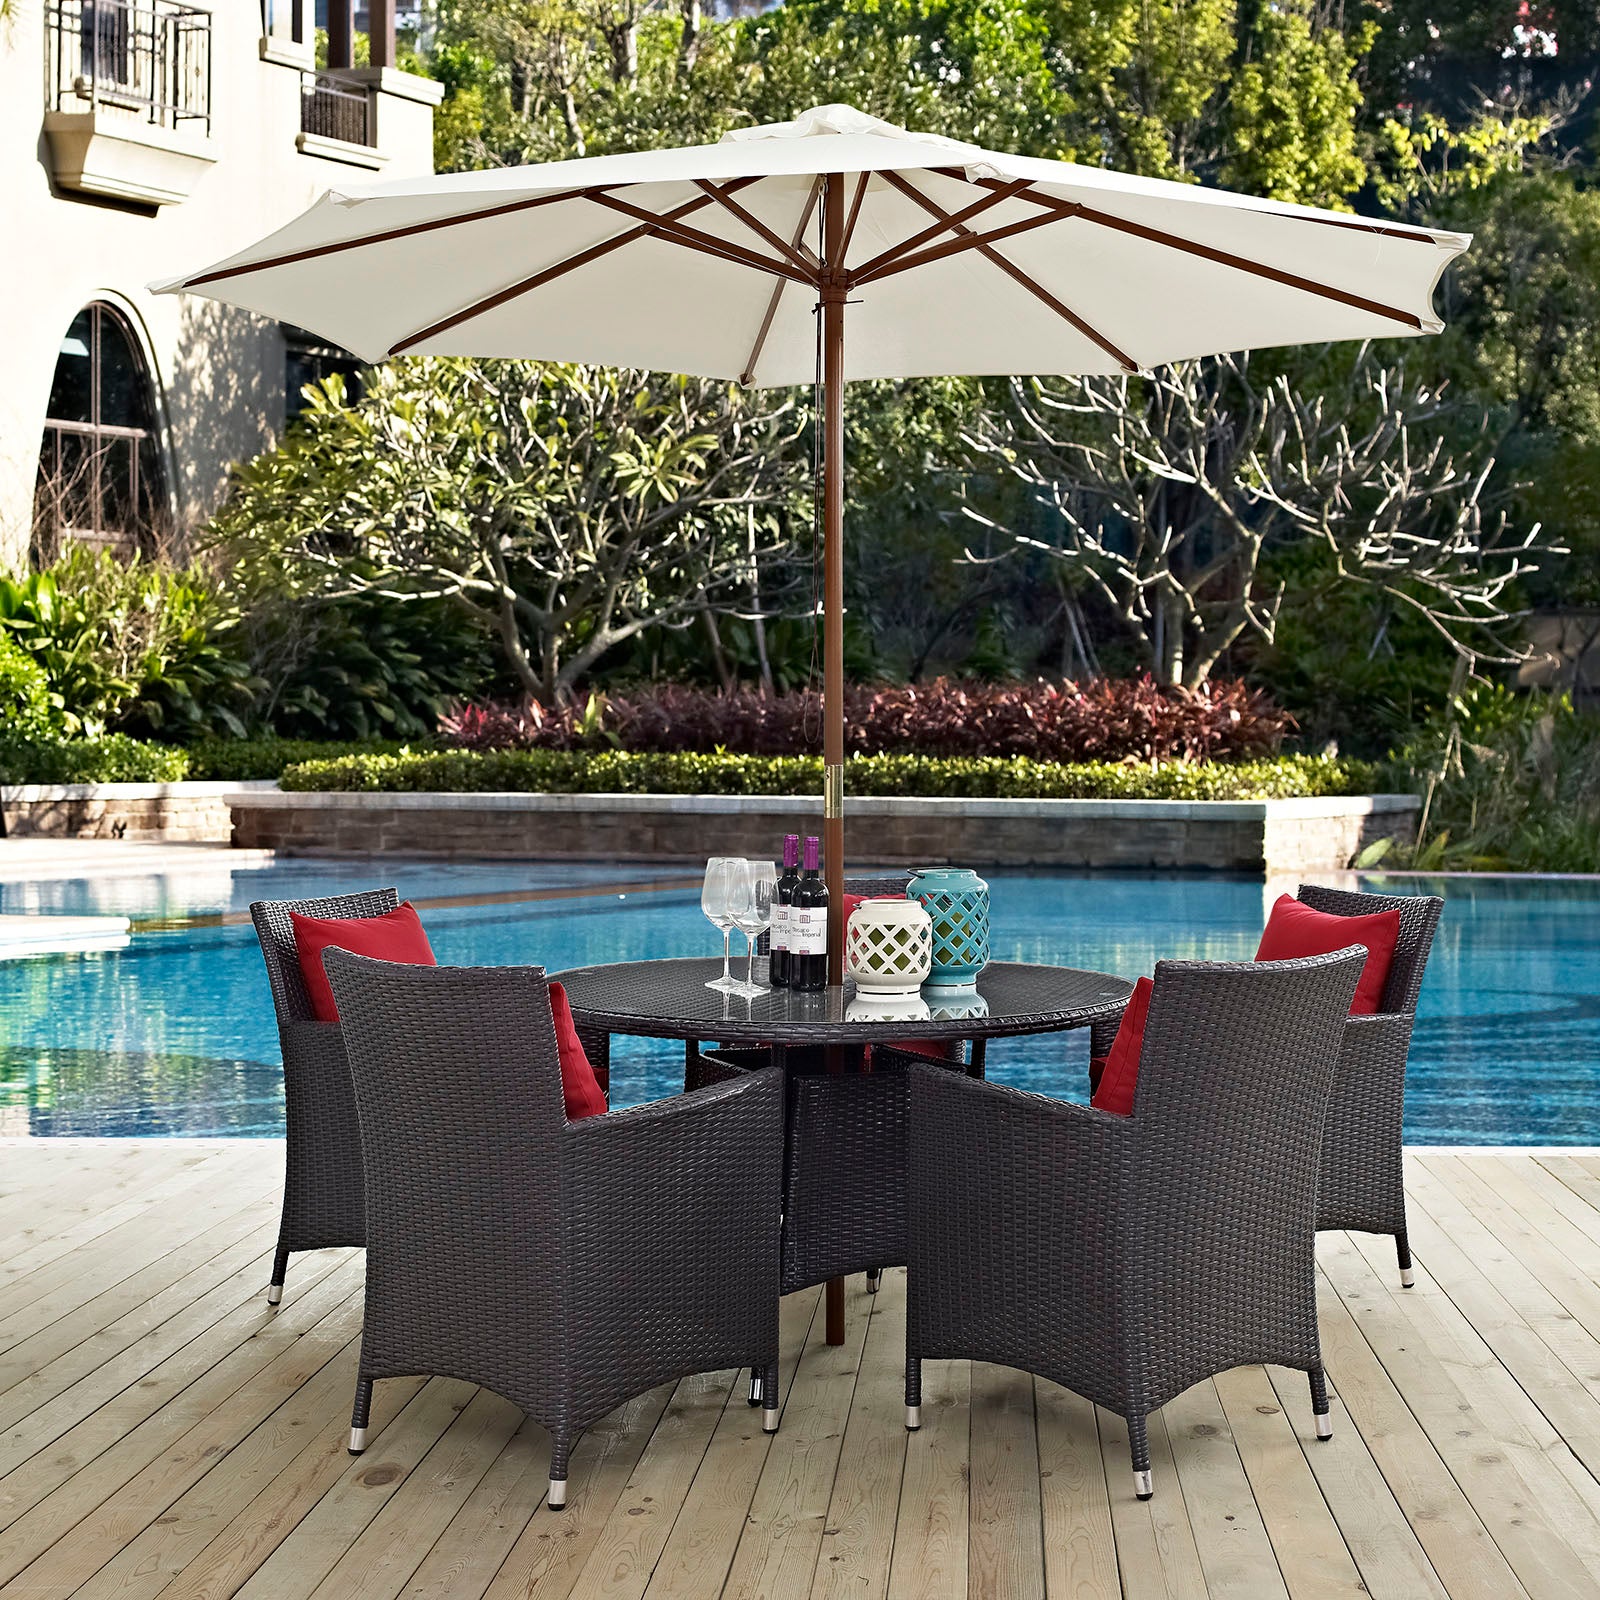 Modway Outdoor Dining Sets - Convene 7 Piece Outdoor Patio Dining Set Red